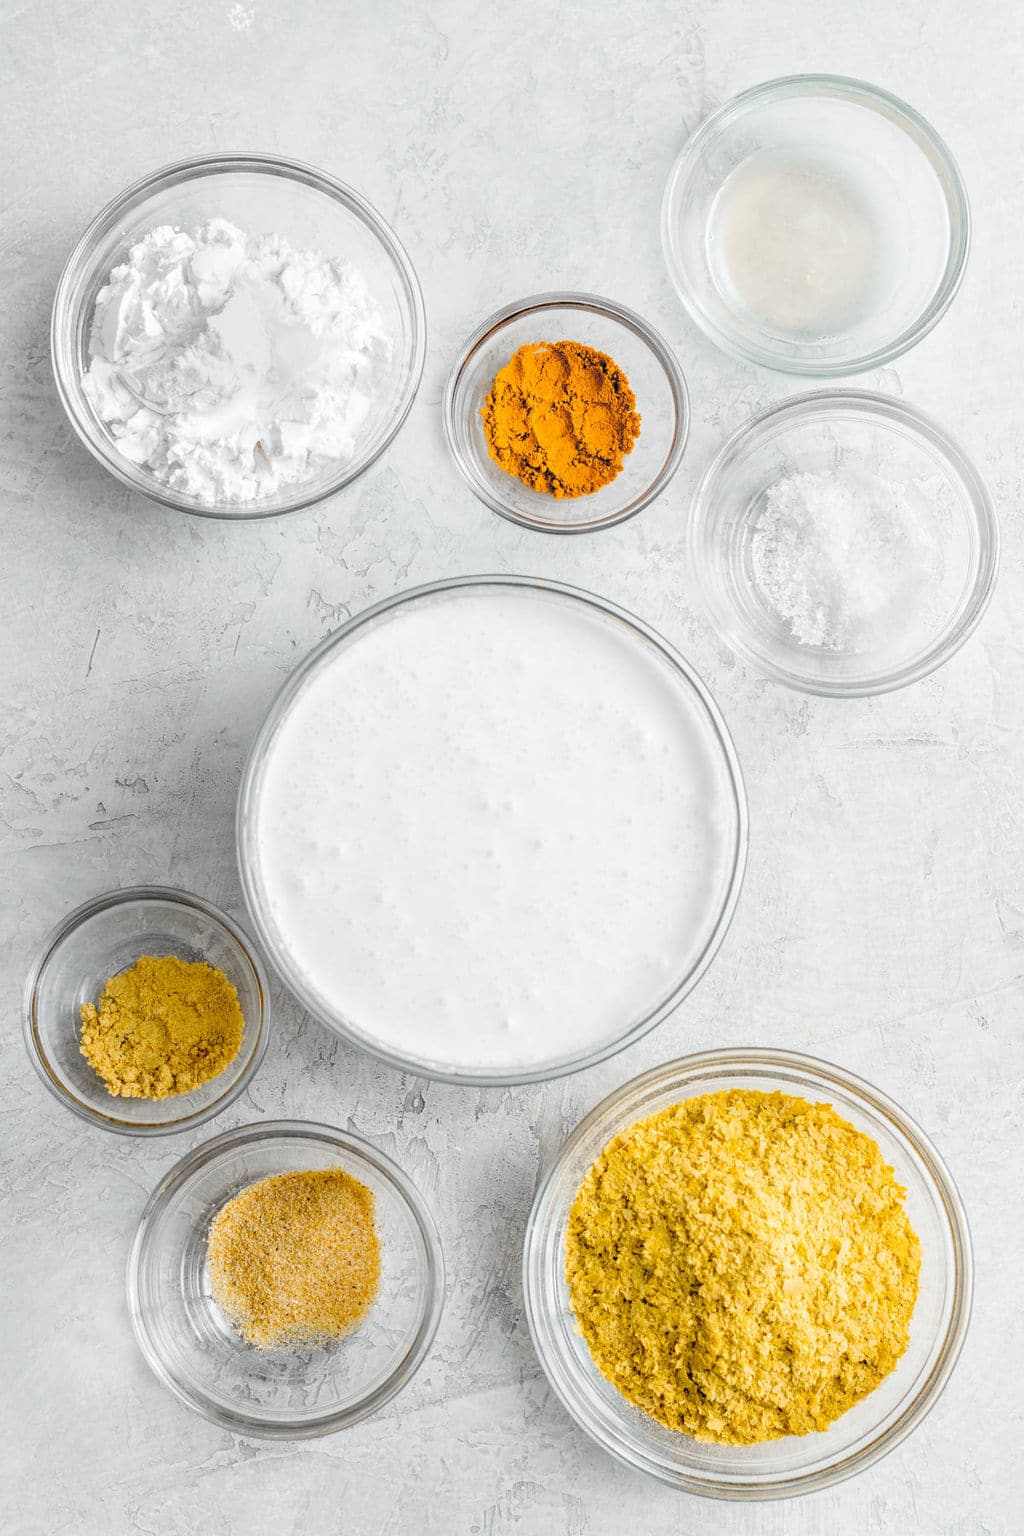 individual glass bowls filled with yellow seasonings, milk, and white powder.